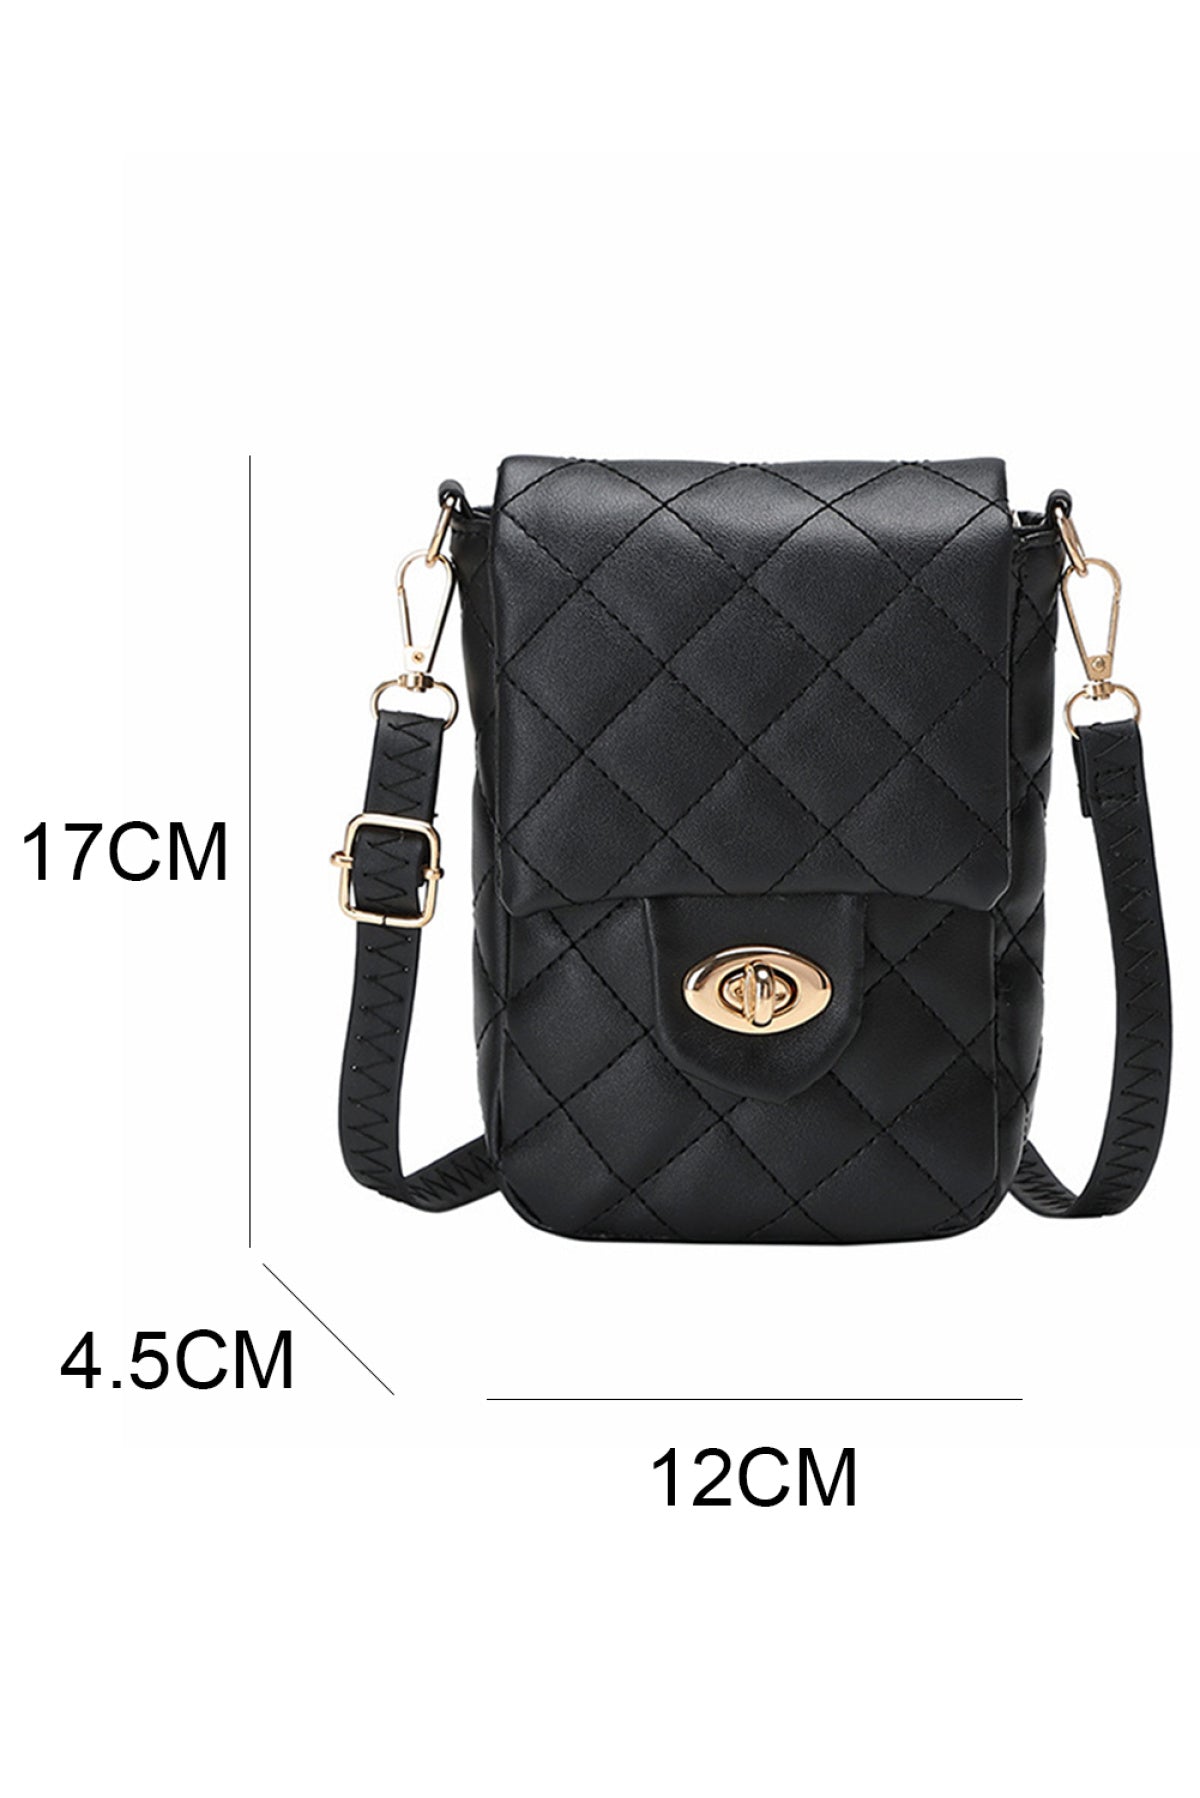 Black Quilted PU Leather Flap Inclined Shoulder Bag